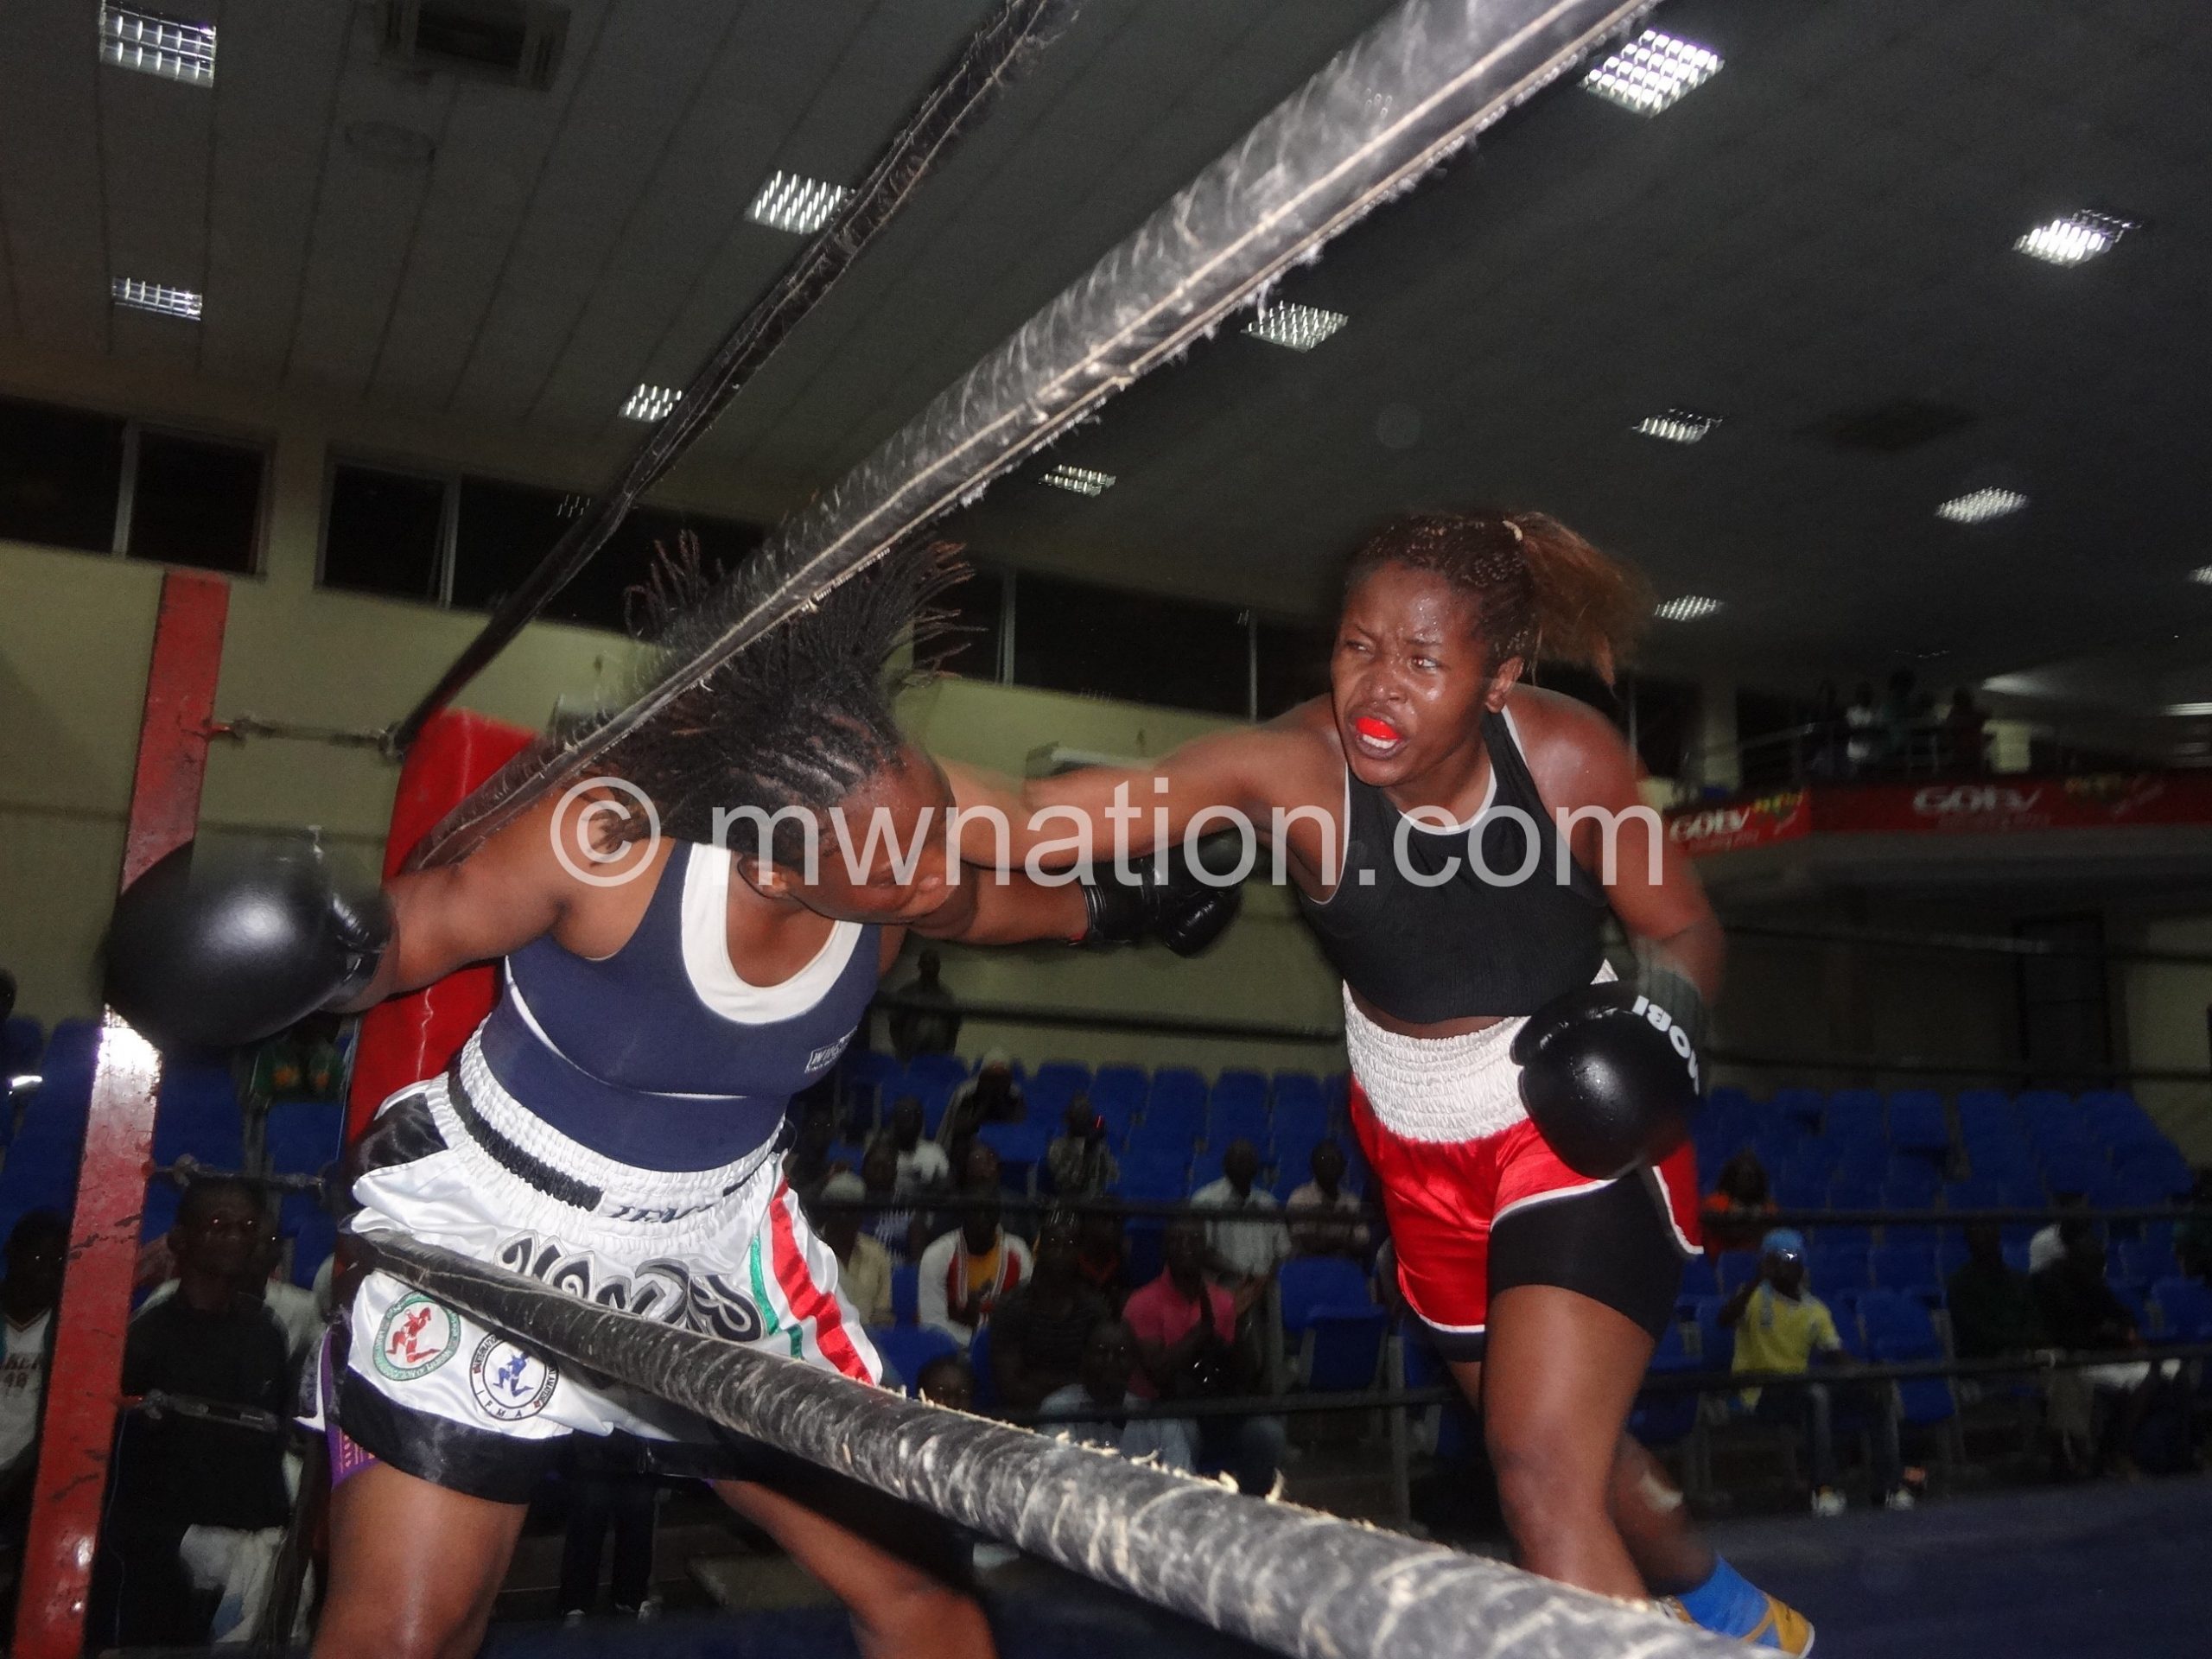 Mtimaukanena (R) lands a punch on Mhubira in the previous fight